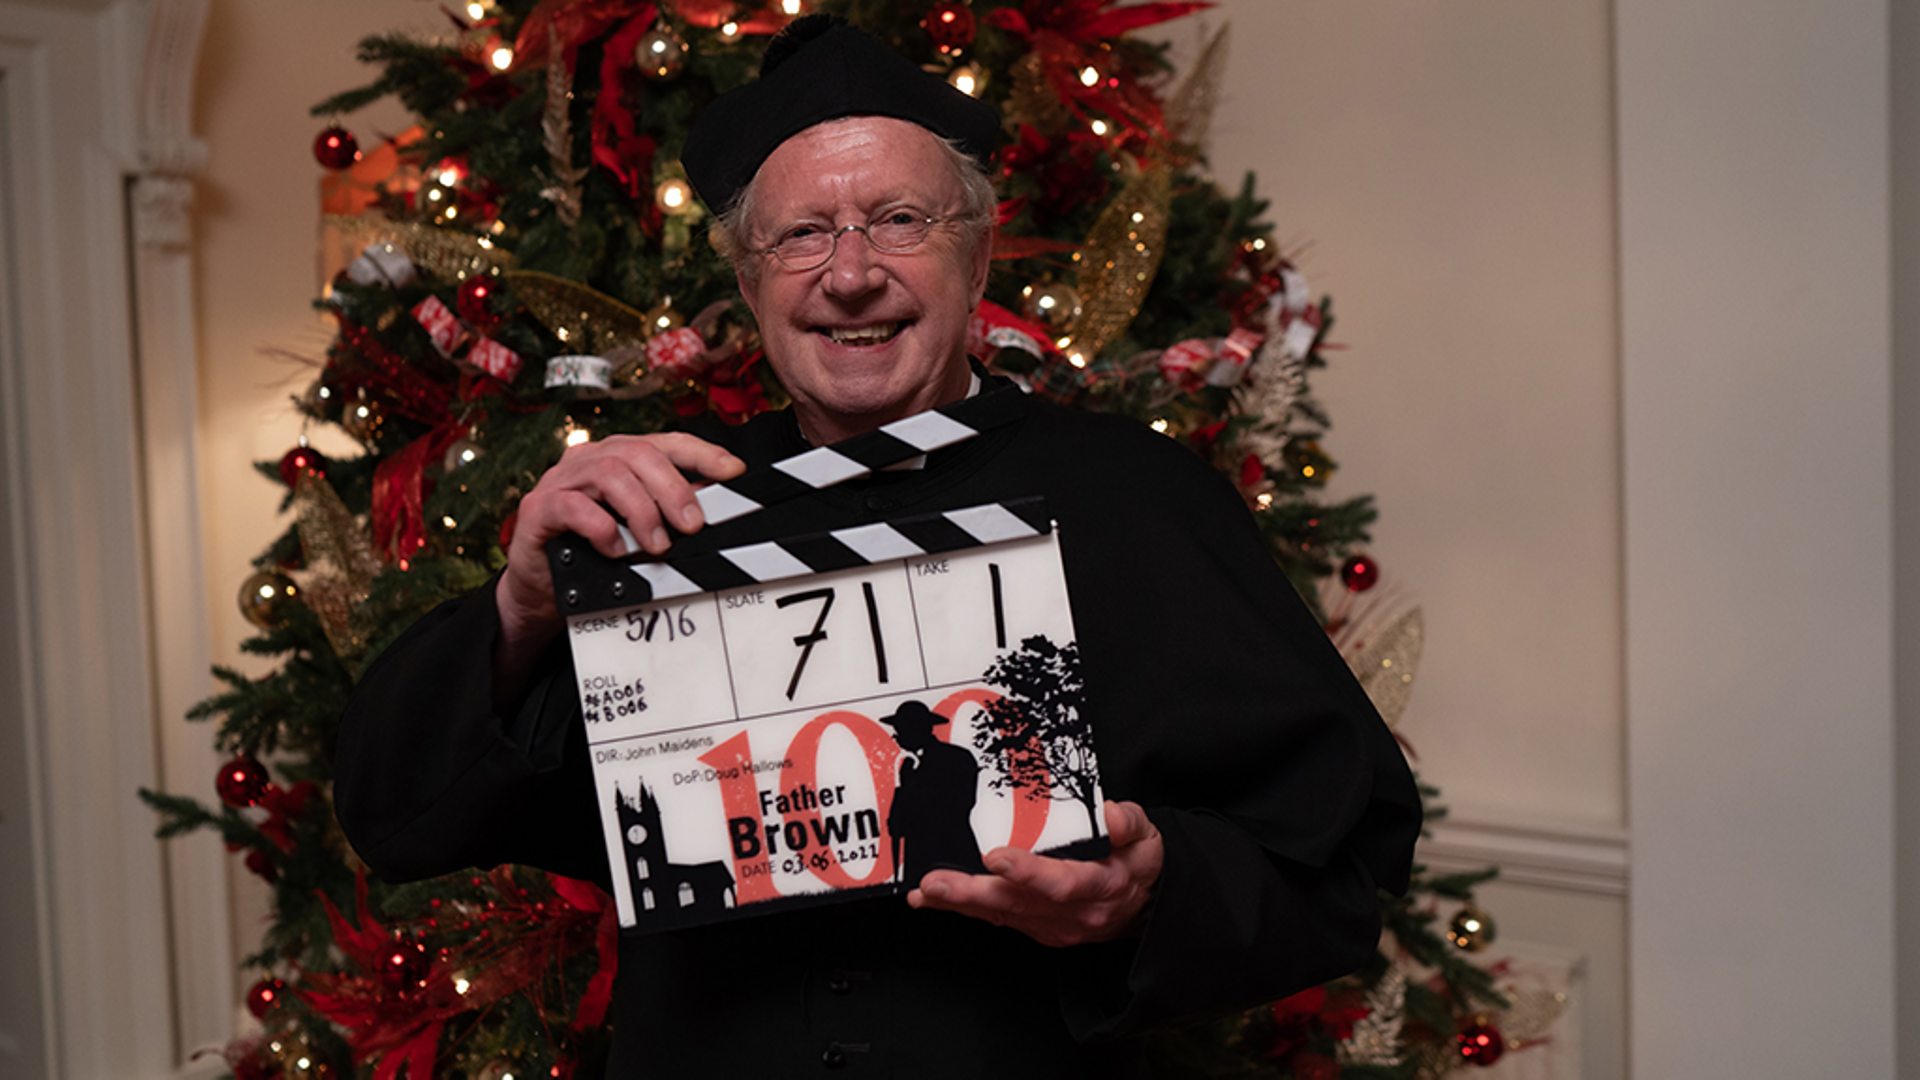 BBC daytime’s Father Brown returns to filming for the ninth series